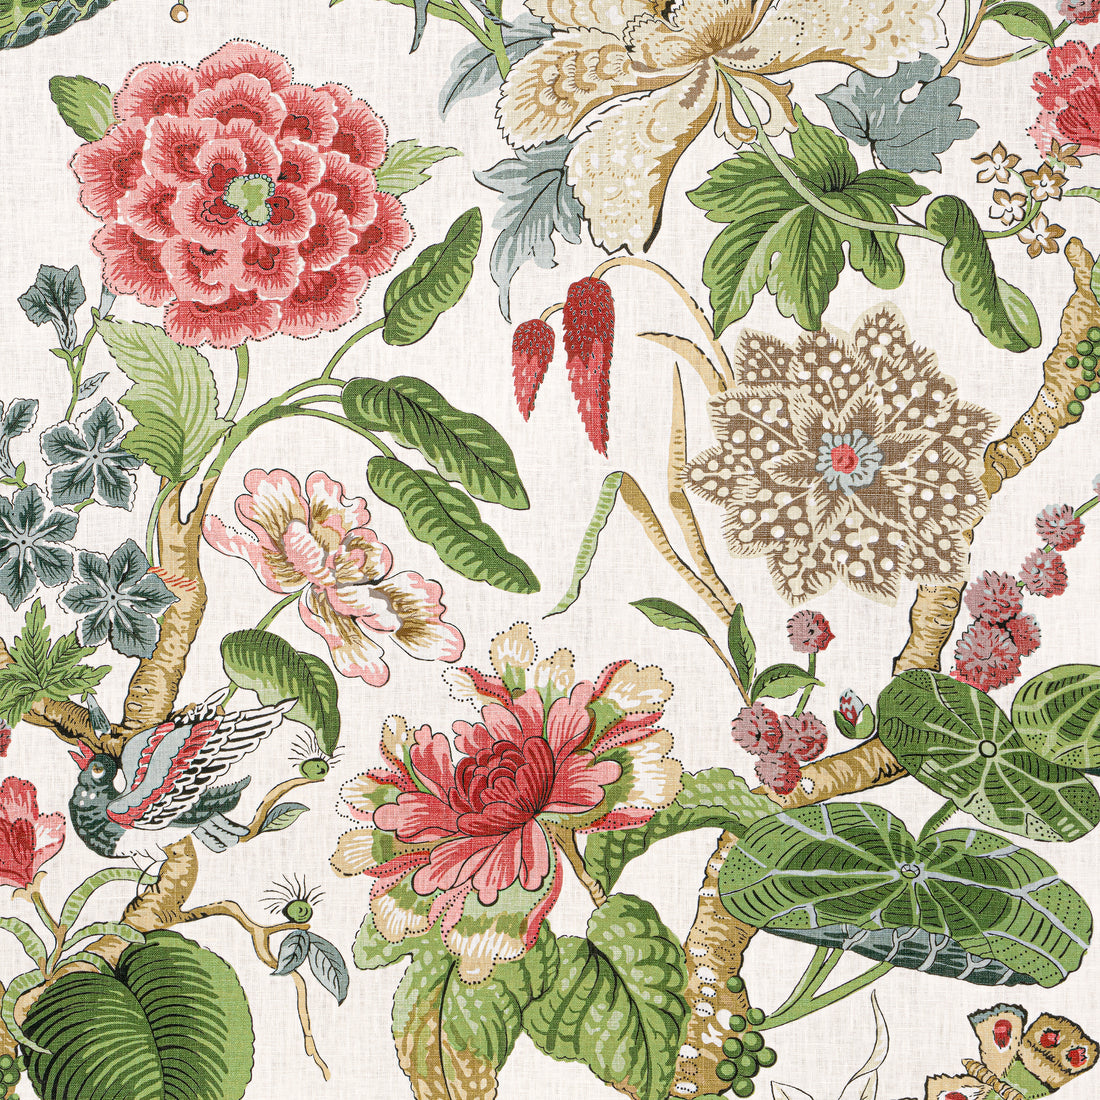 Hill Garden fabric in coral and green - pattern number F913658 - by Thibaut in the Grand Palace collection